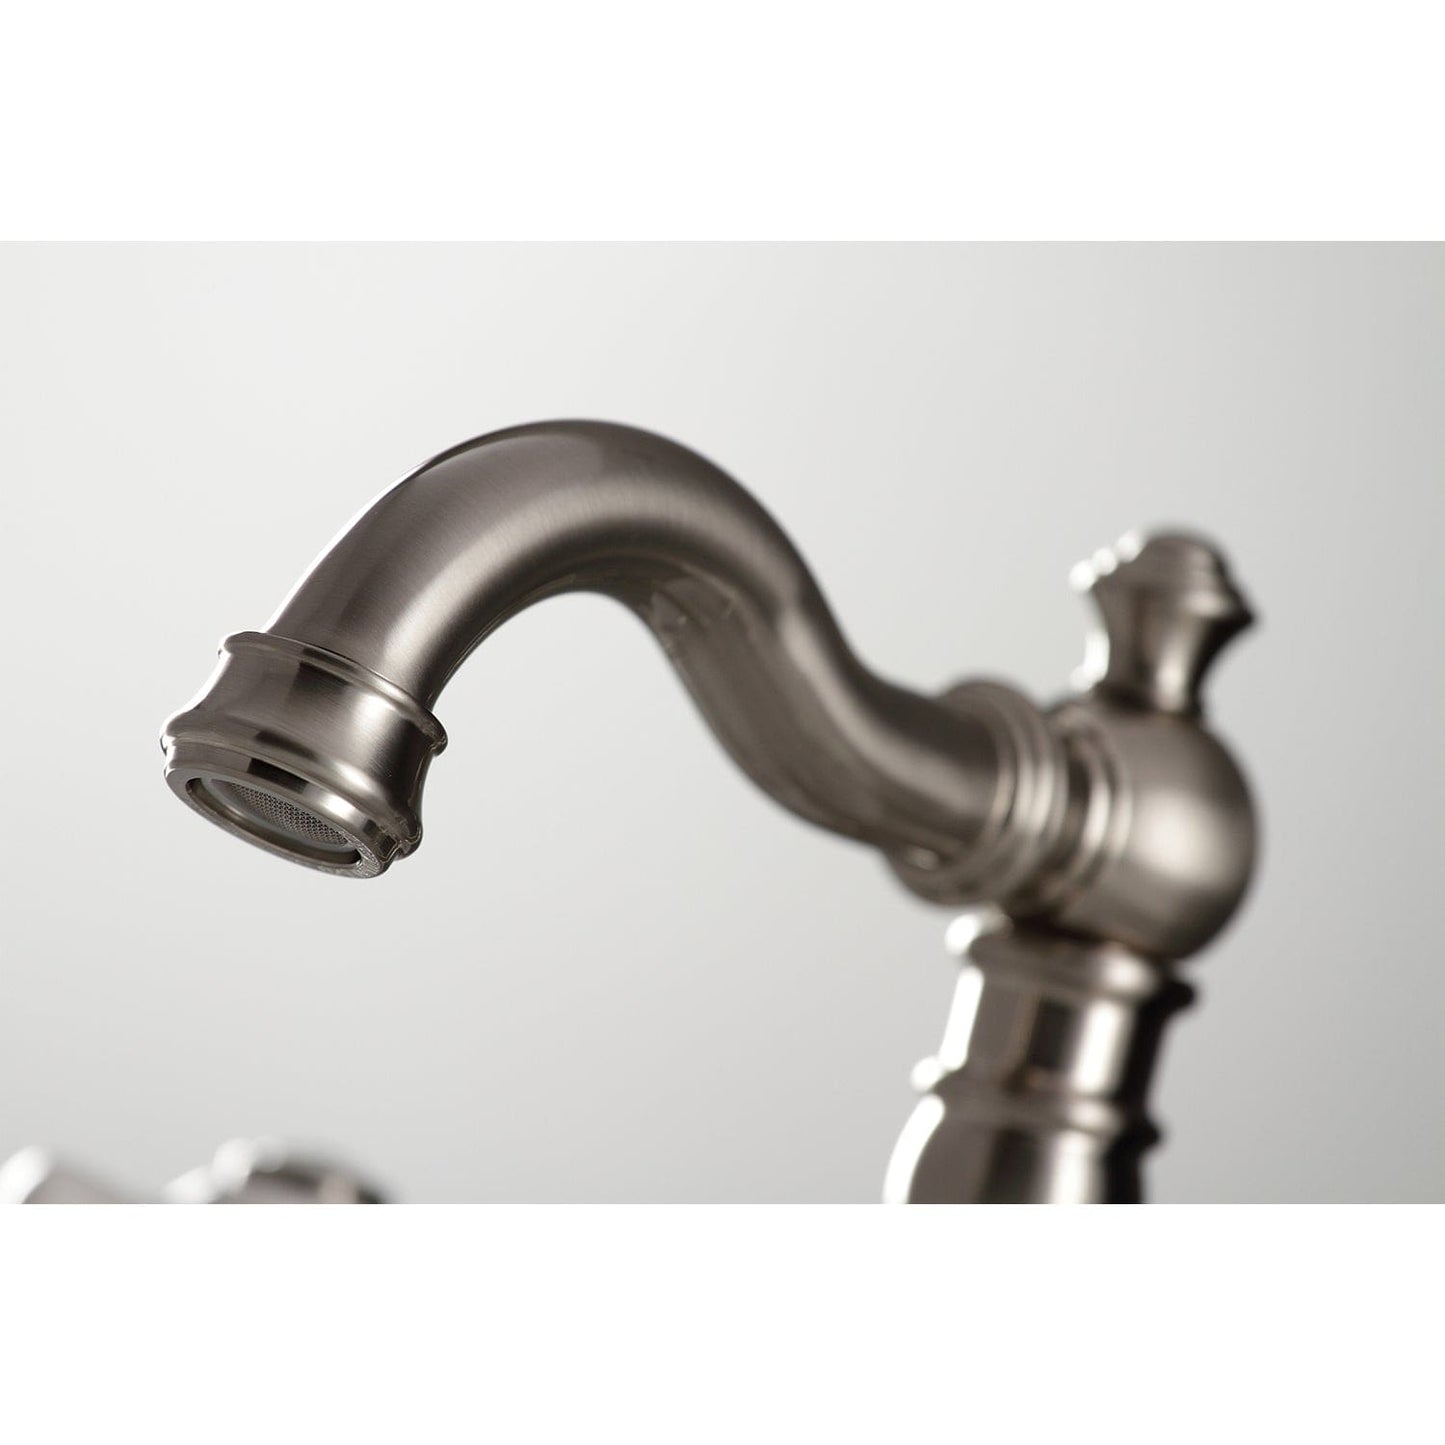 KINGSTON Brass Fauceture American Classic Widespread Bathroom Faucet - Brushed Nickel